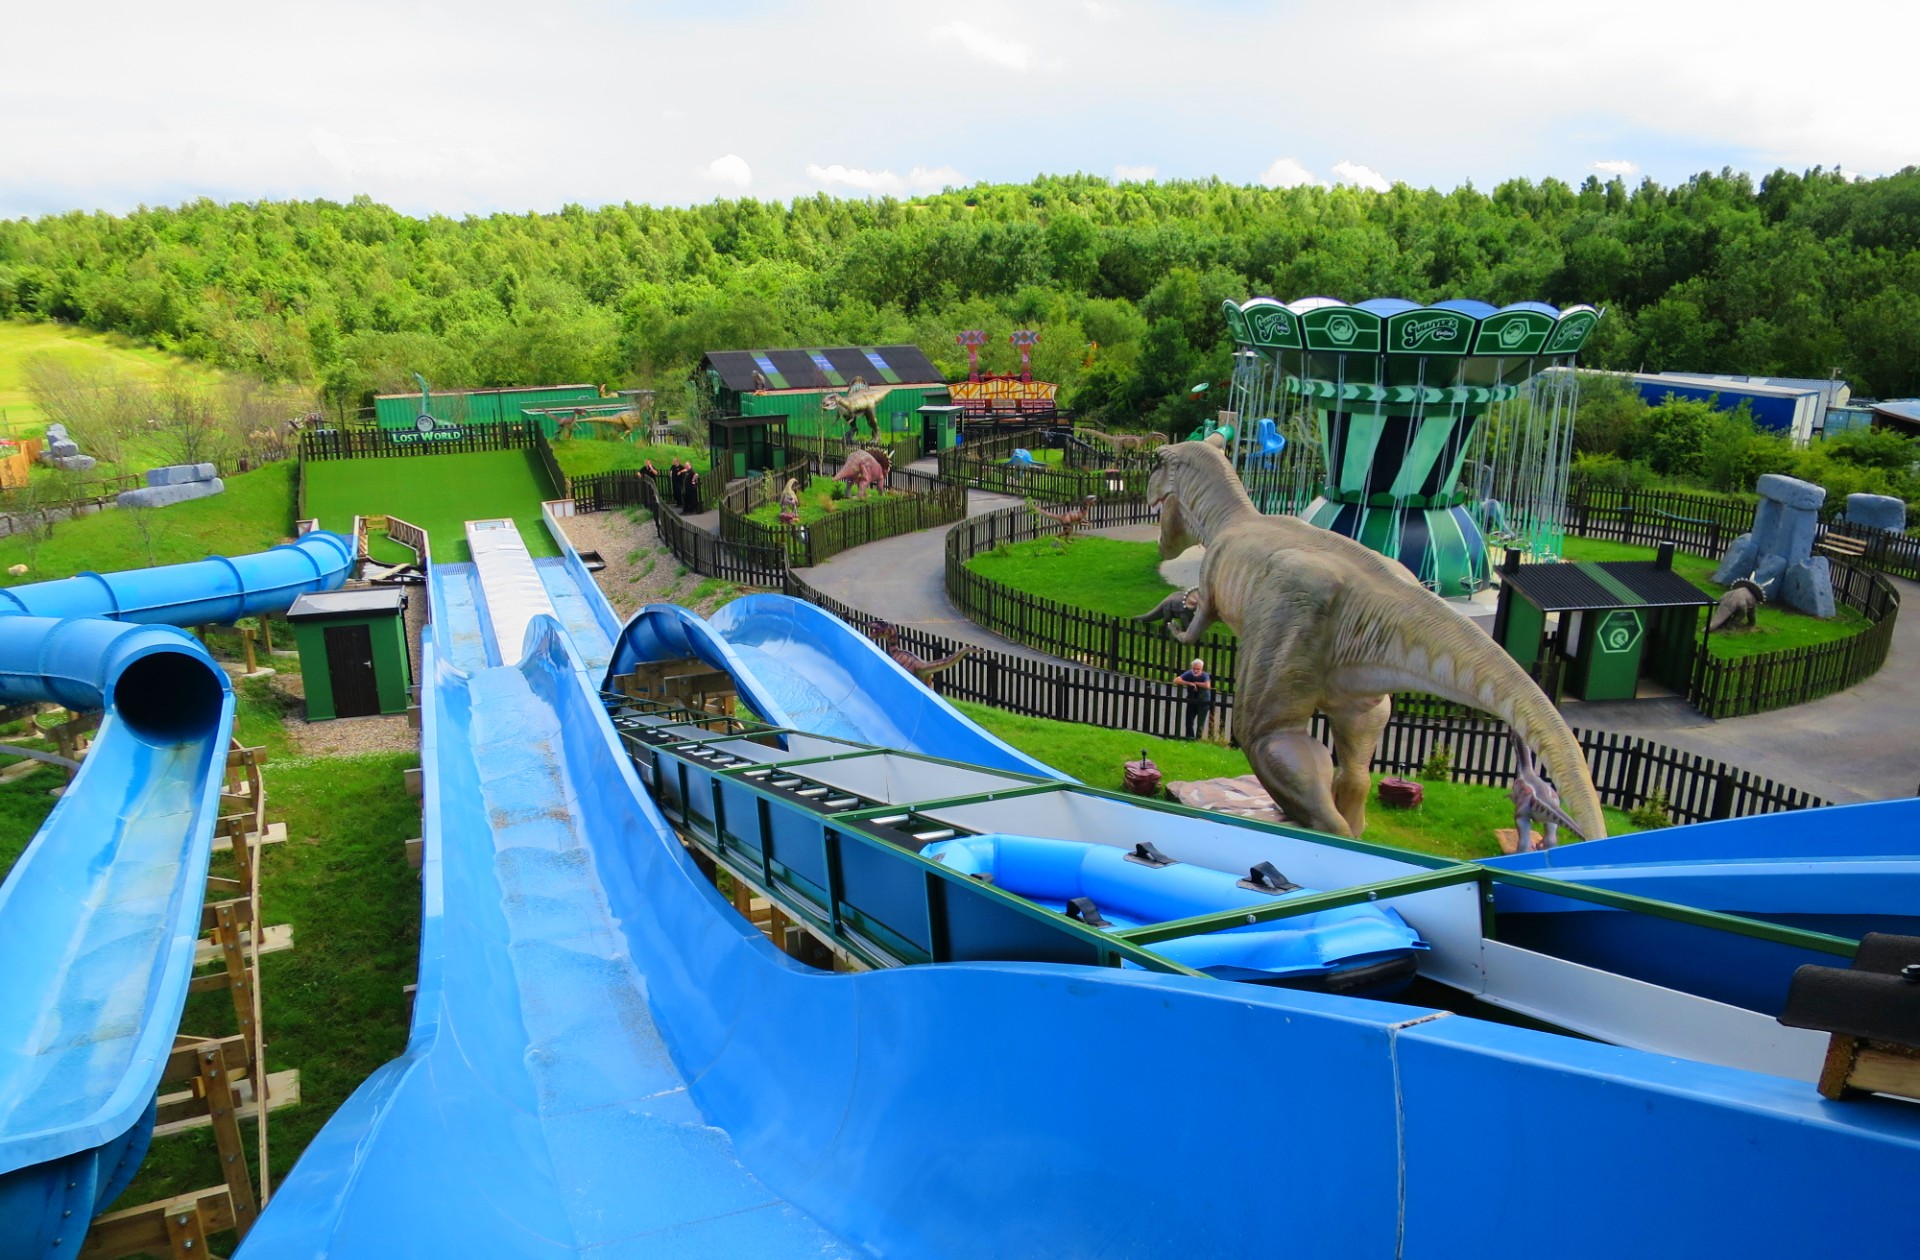 You Can Now Buy Tickets To Yorkshire’s New Theme Park Gulliver’s Valley